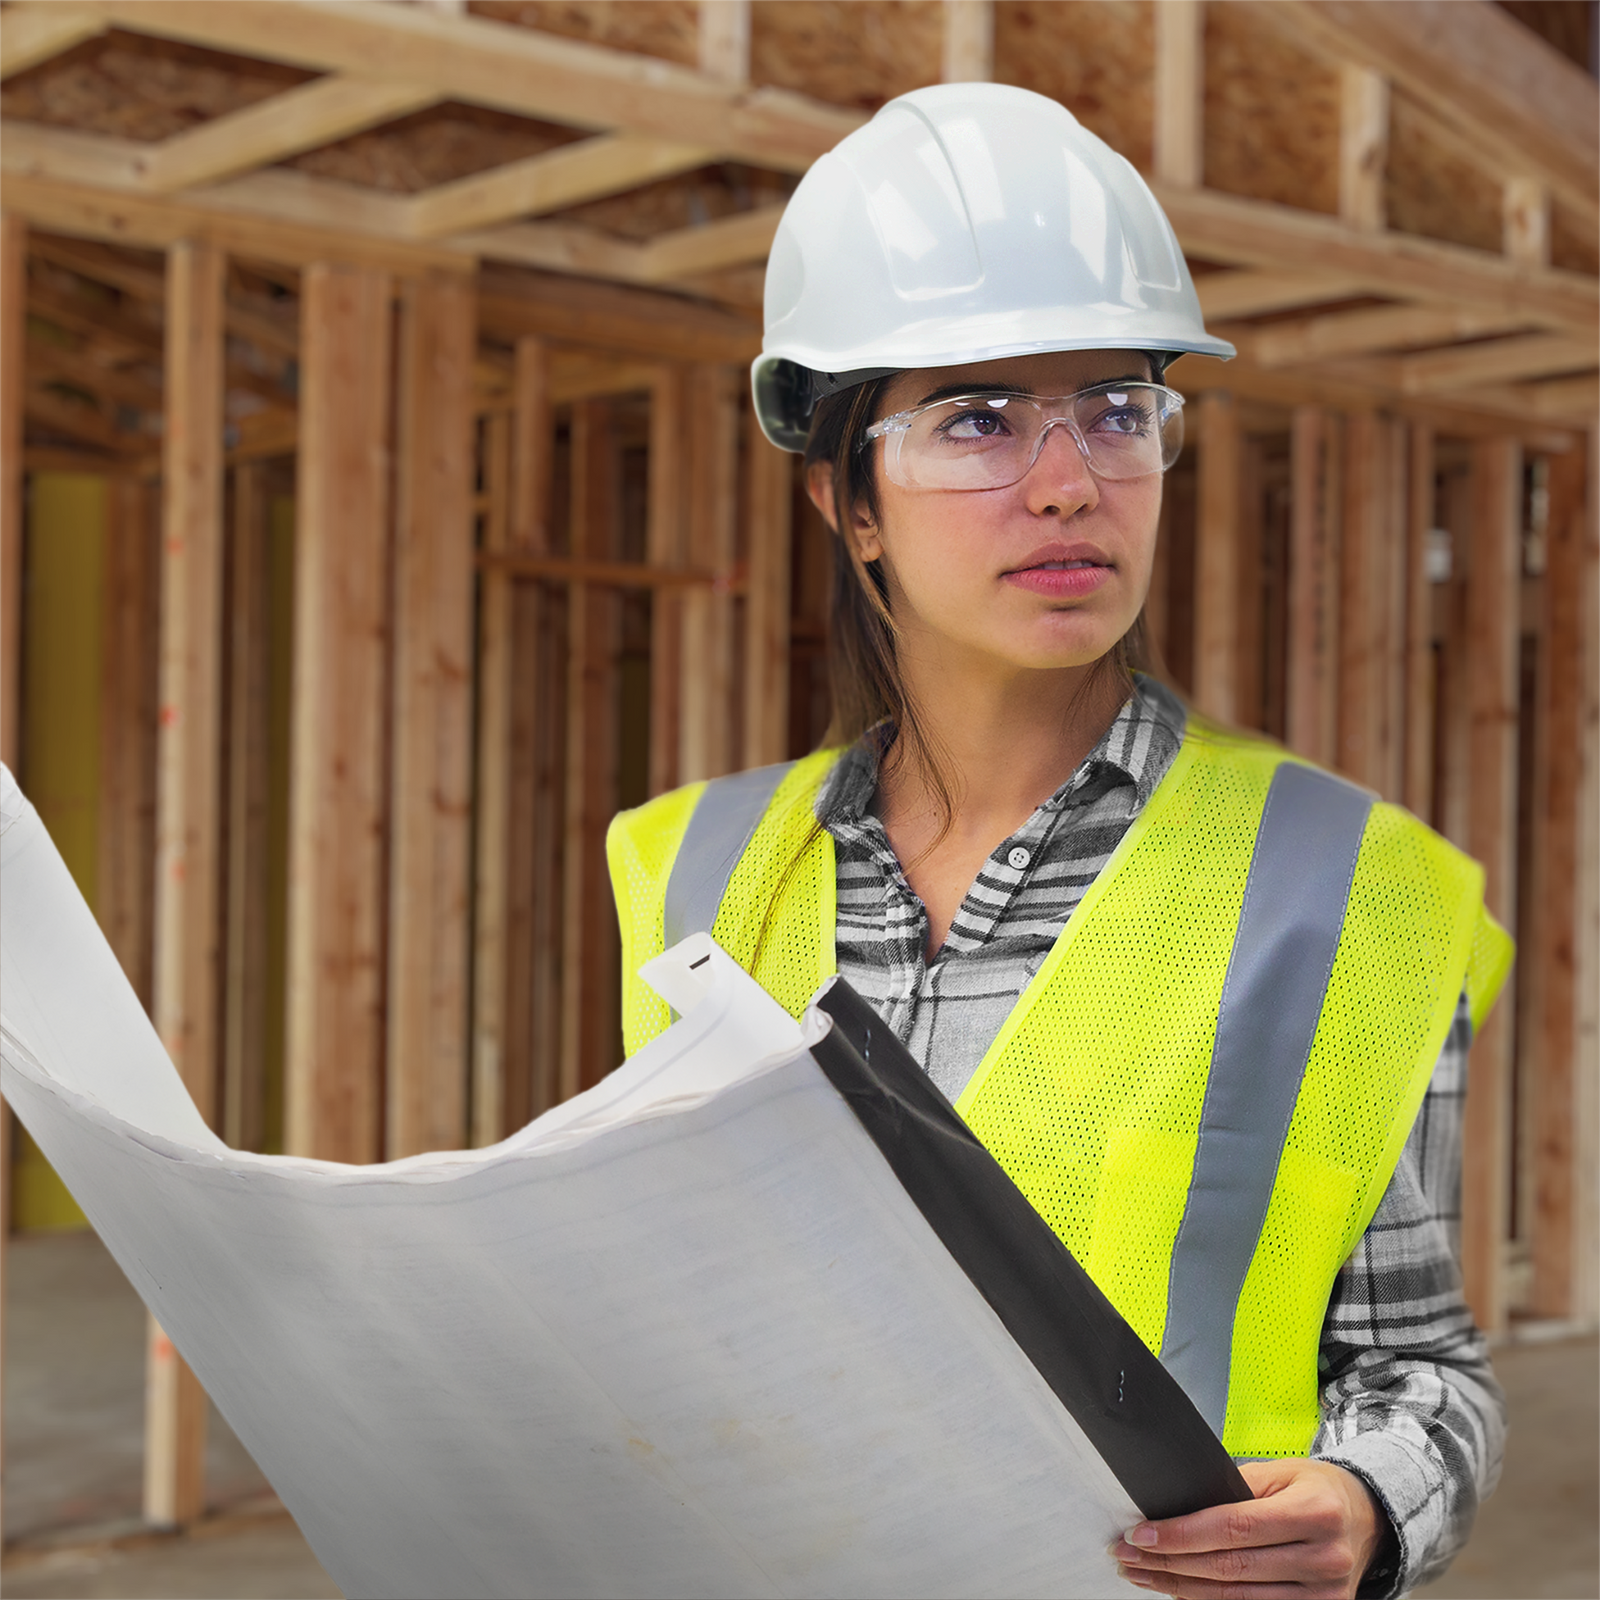 A surveyor wearing a white hard hat, a high visibility reflective safety vest and the Panoramic JORESTECH safety glasses for high impact eye protection. The person is looking at a set of blue prints related to the construction she is inspecting.